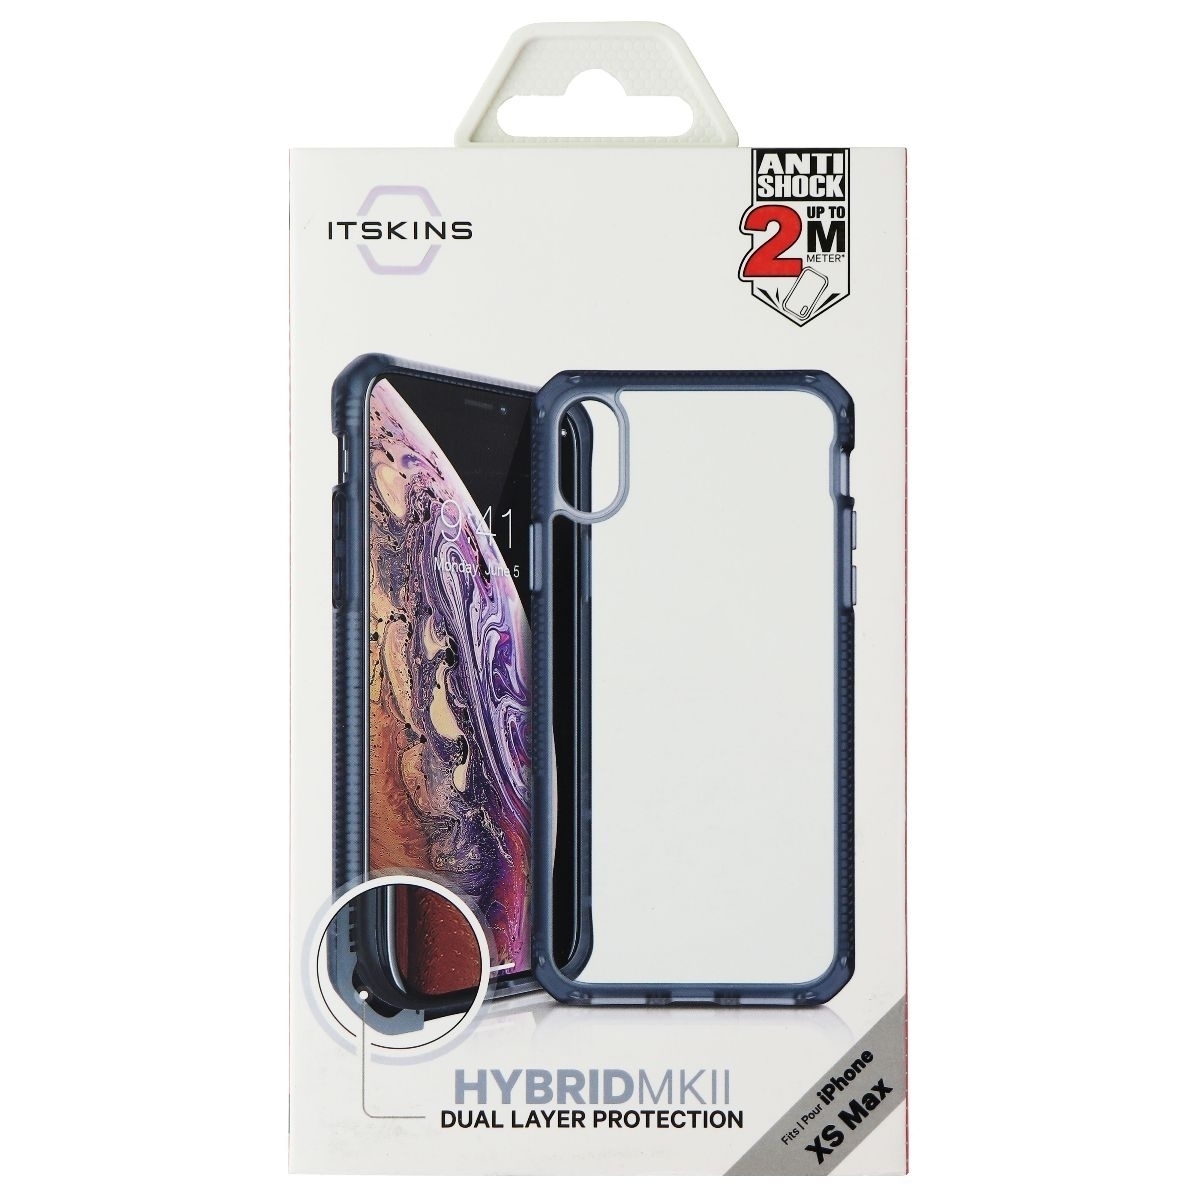 ITSKINS Hybrid Frost Case For Apple IPhone Xs Max - Black And Transparent